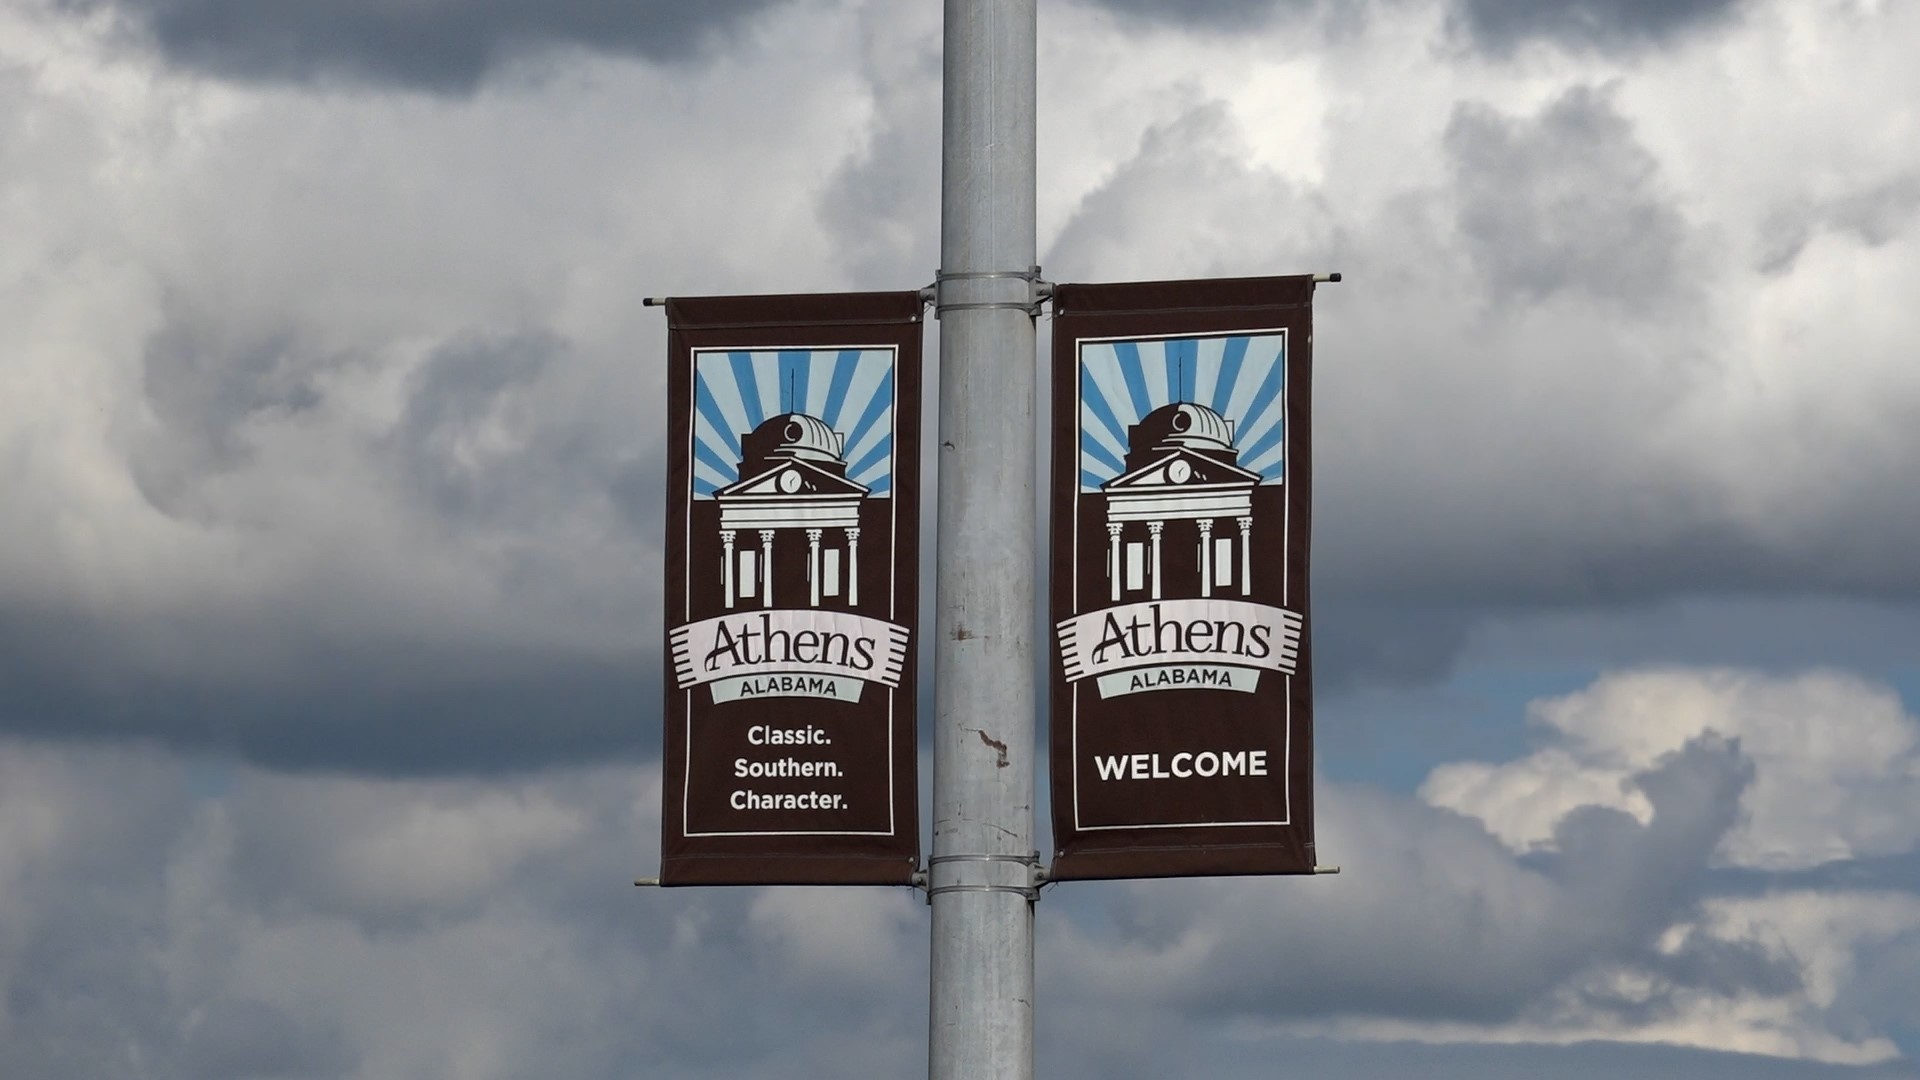 "We're all looking for ways to have fun, and now Athens and Limestone County Commission hope what they have to offer will attract more visitors to the city."